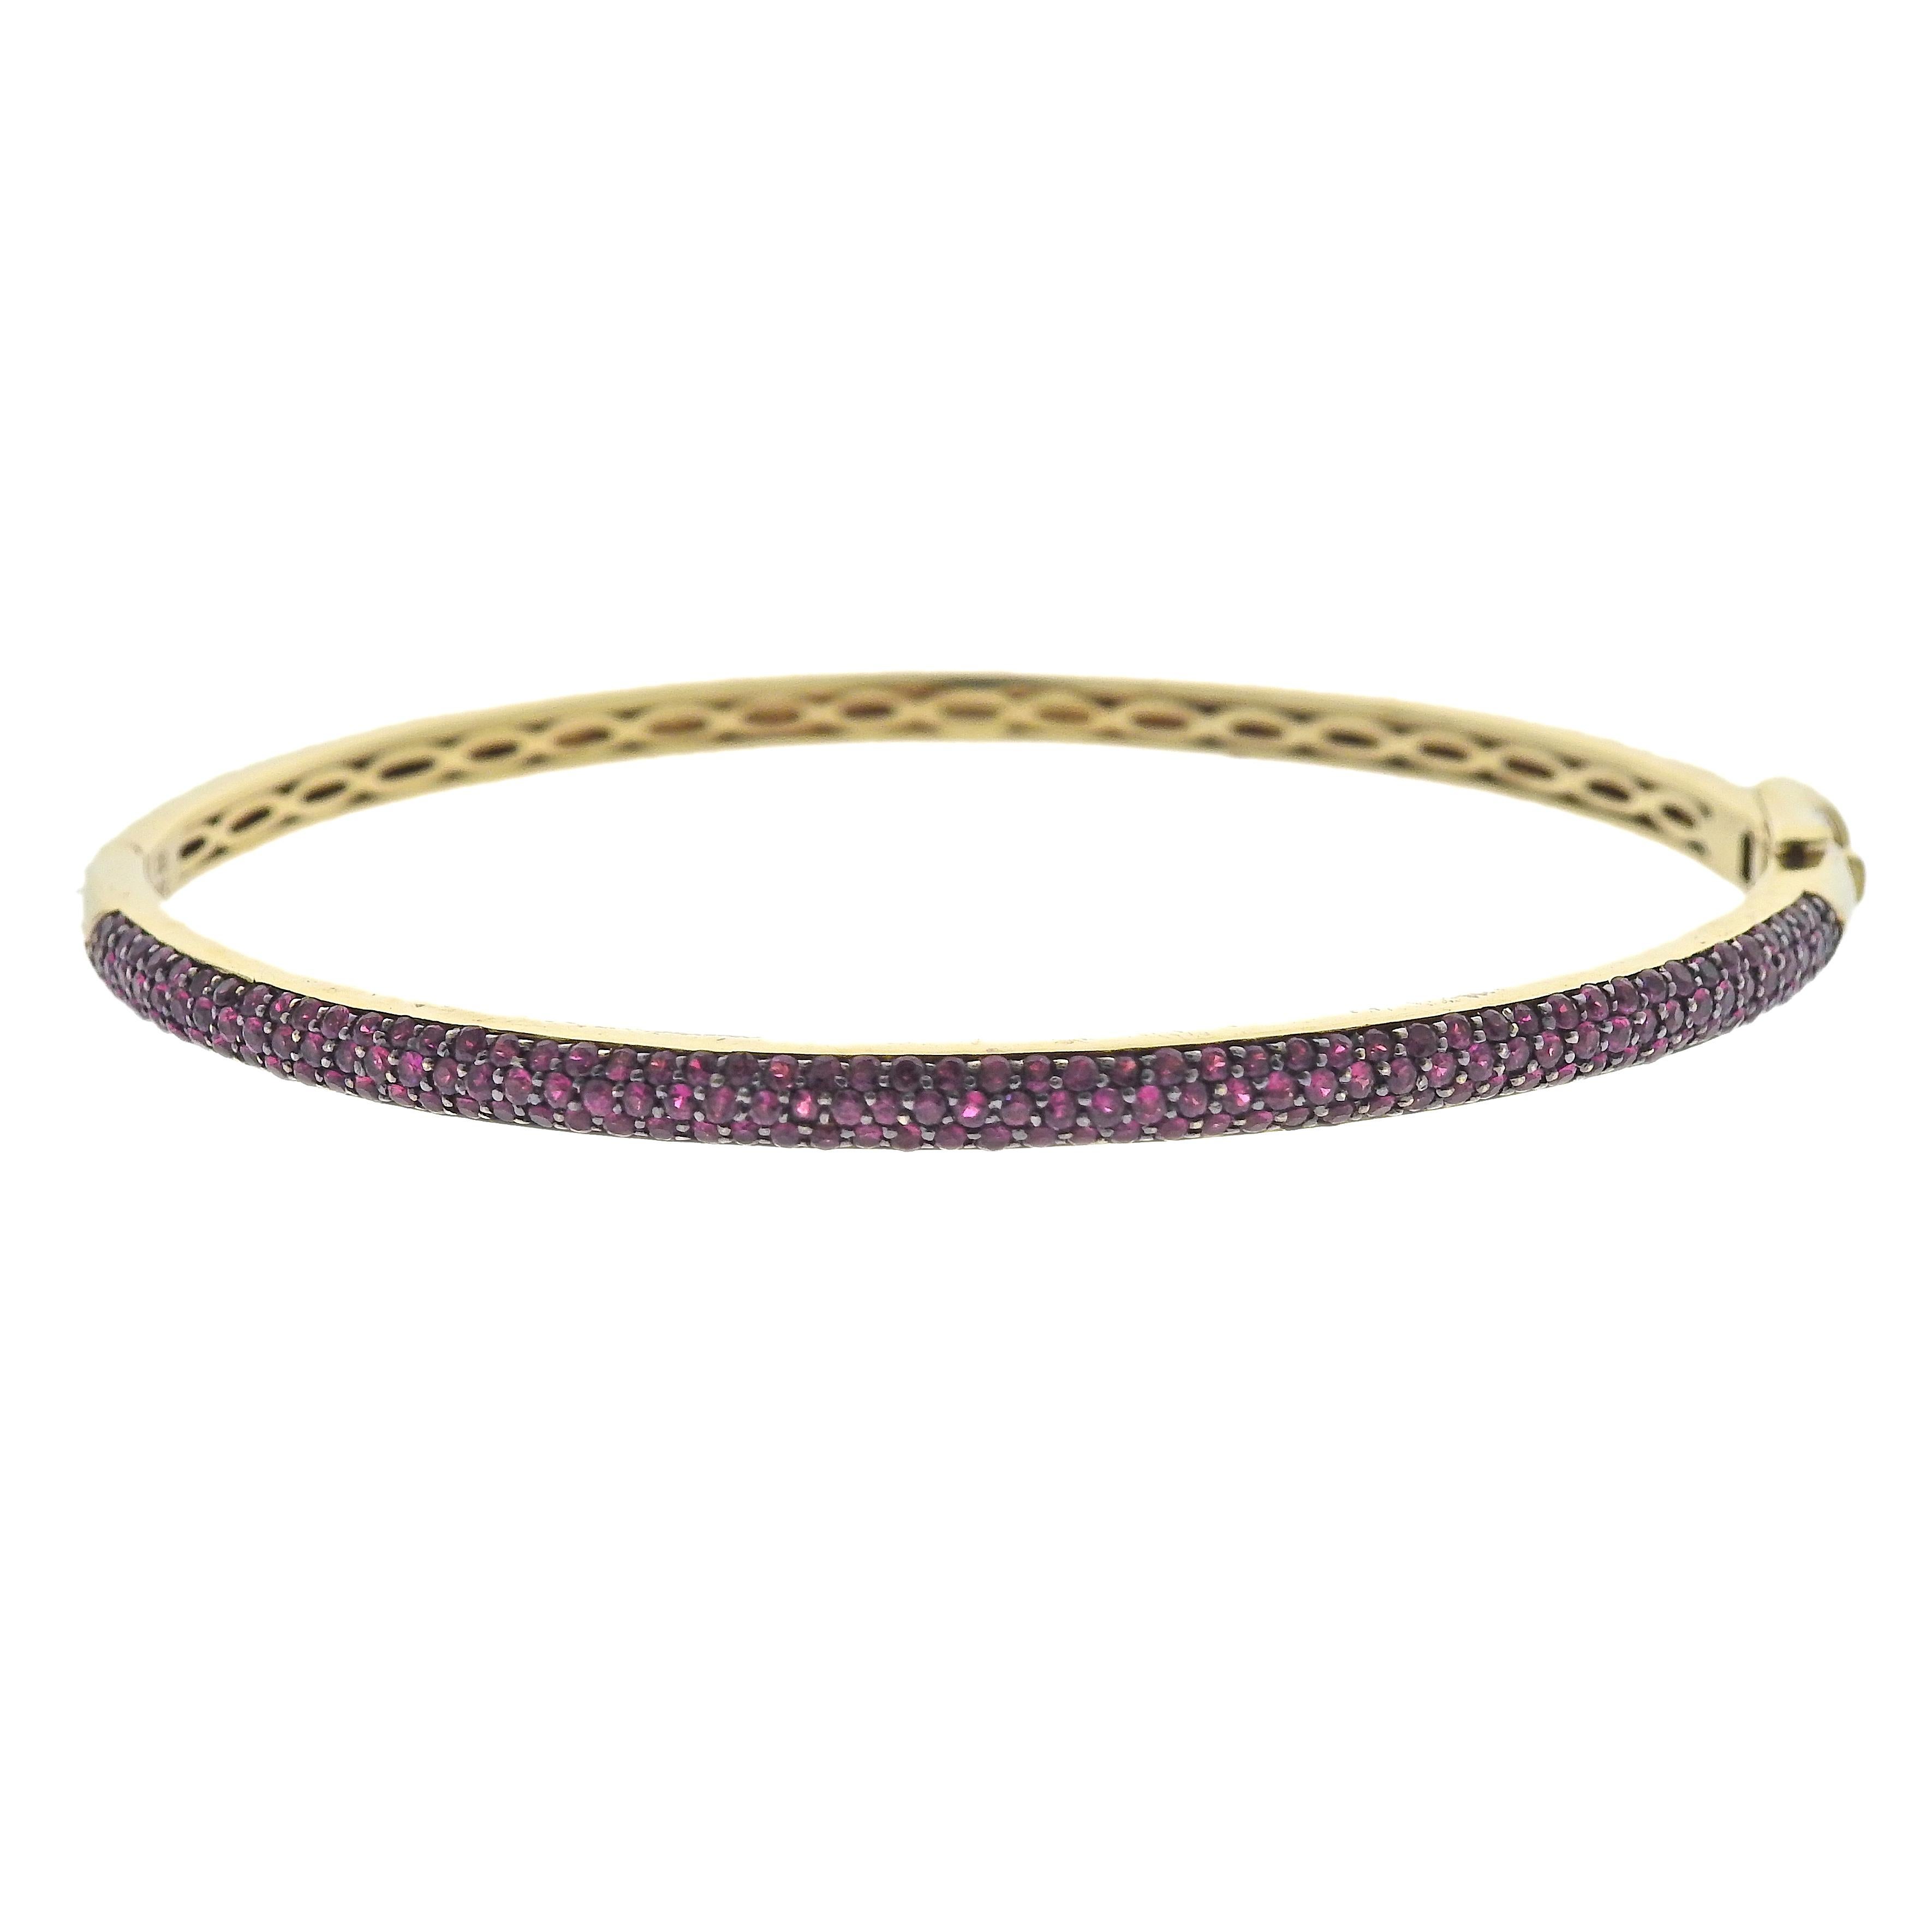 Clyde Duneier Gold Ruby Bangle Bracelet. Features approx 1.80ctw in Rubies. Bracelet will fit 6 3/4